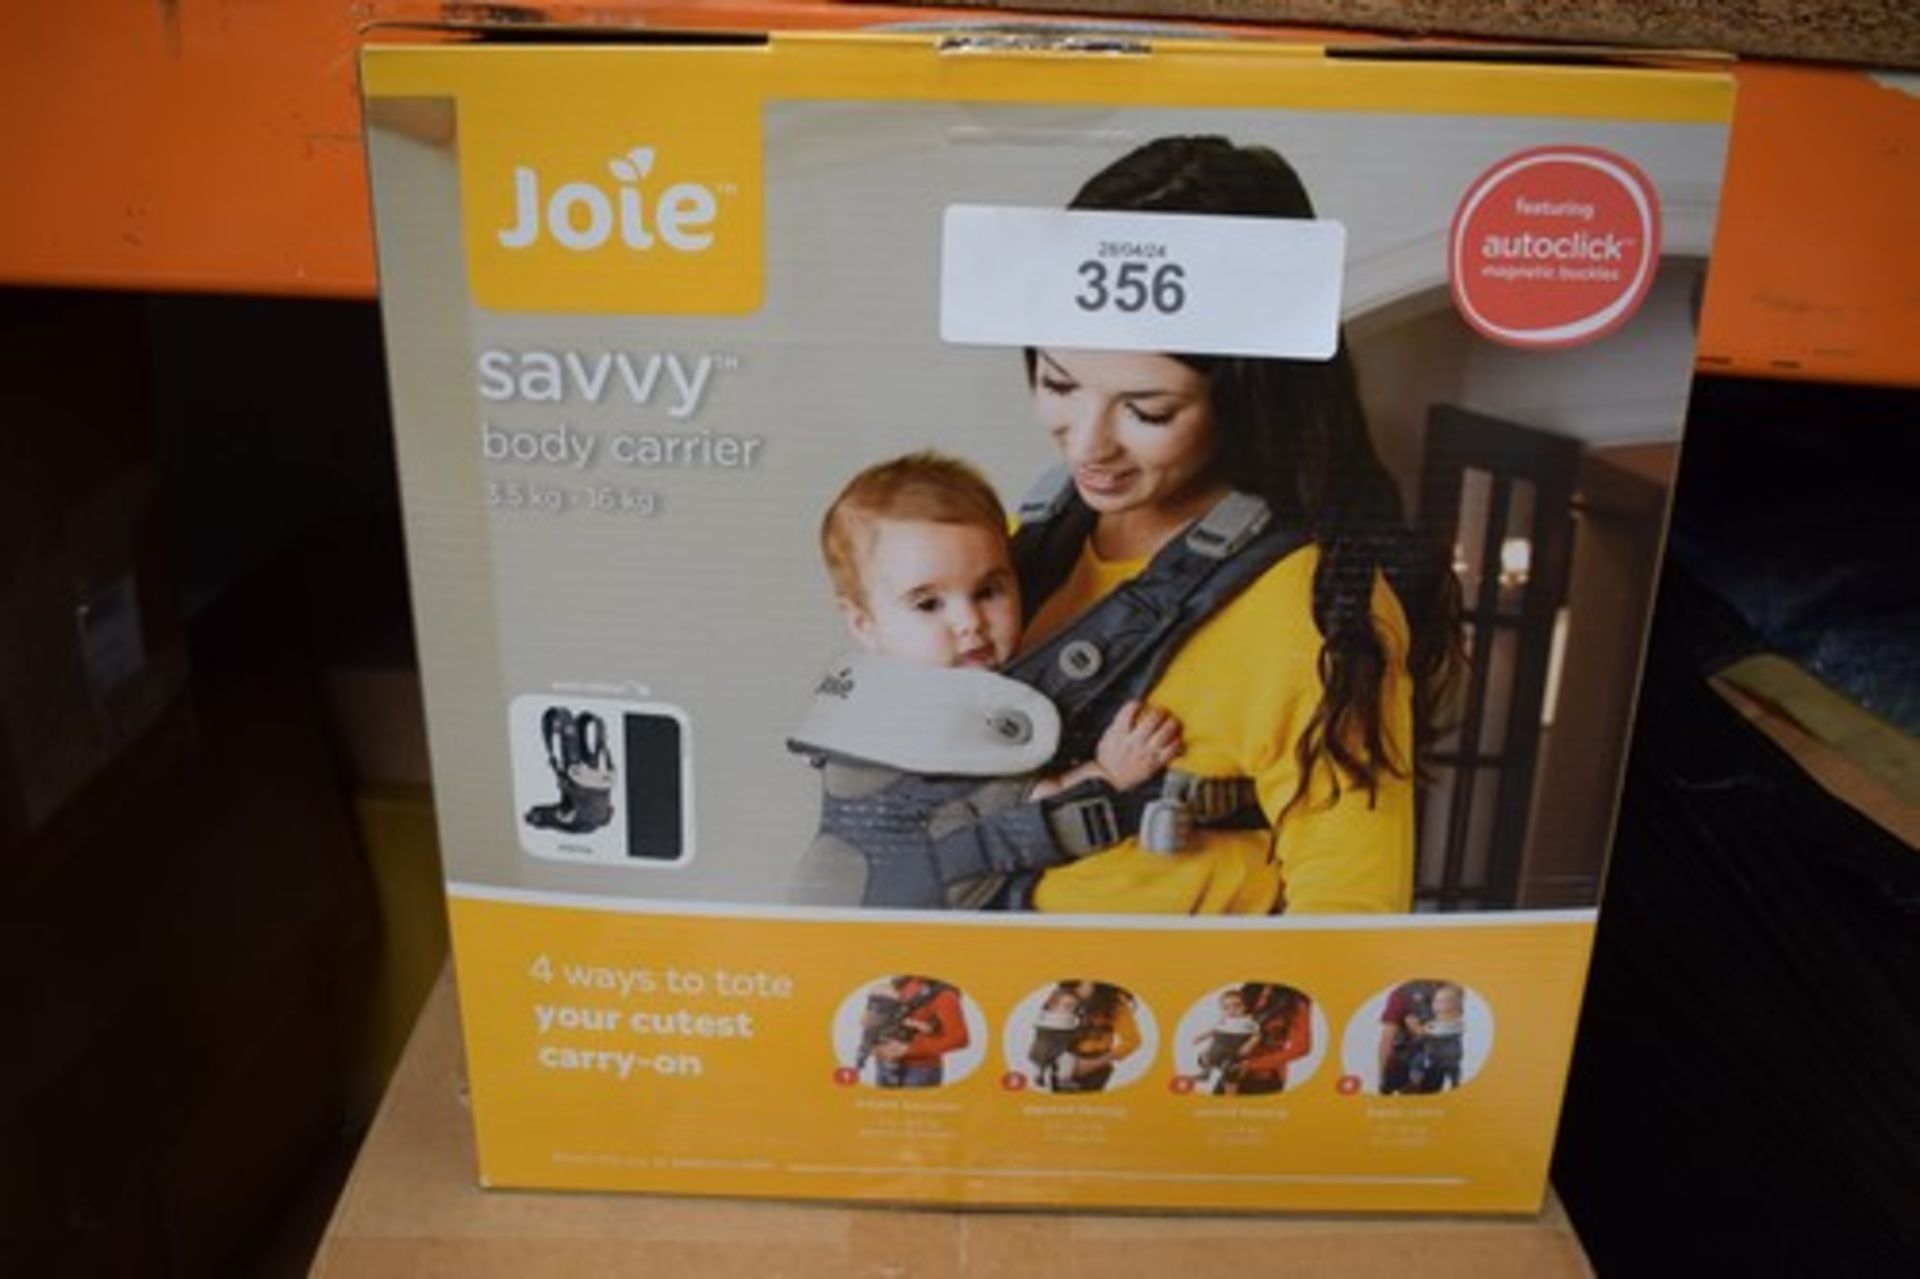 1 x Joie Savvy body carrier, code: V1907AAMNA000, EAN: 5056080610900 - sealed new in box (C18)